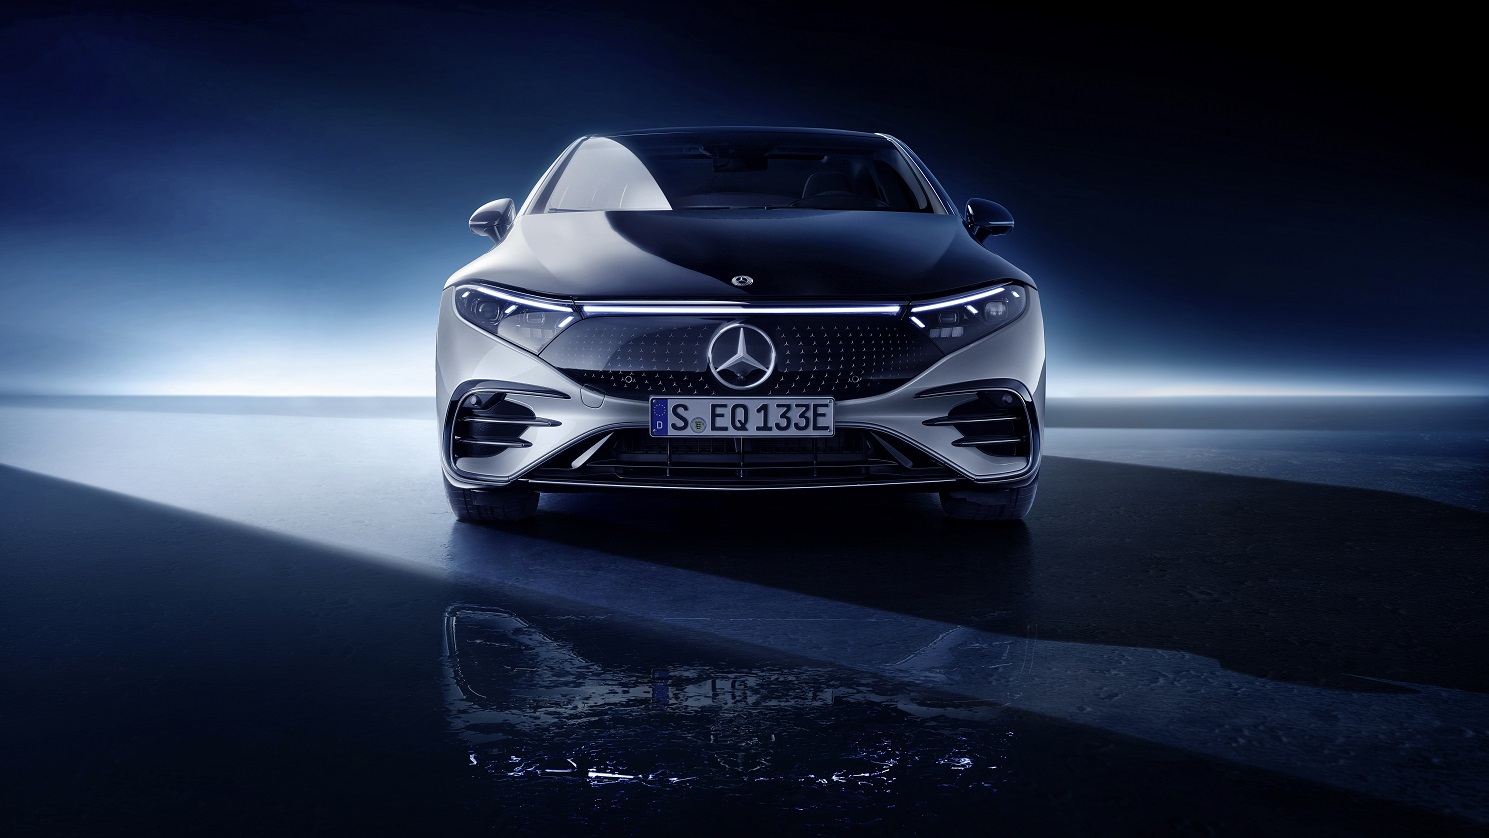 [Translate to Englisch:] Mercedes EQS 450 4MATIC - Front